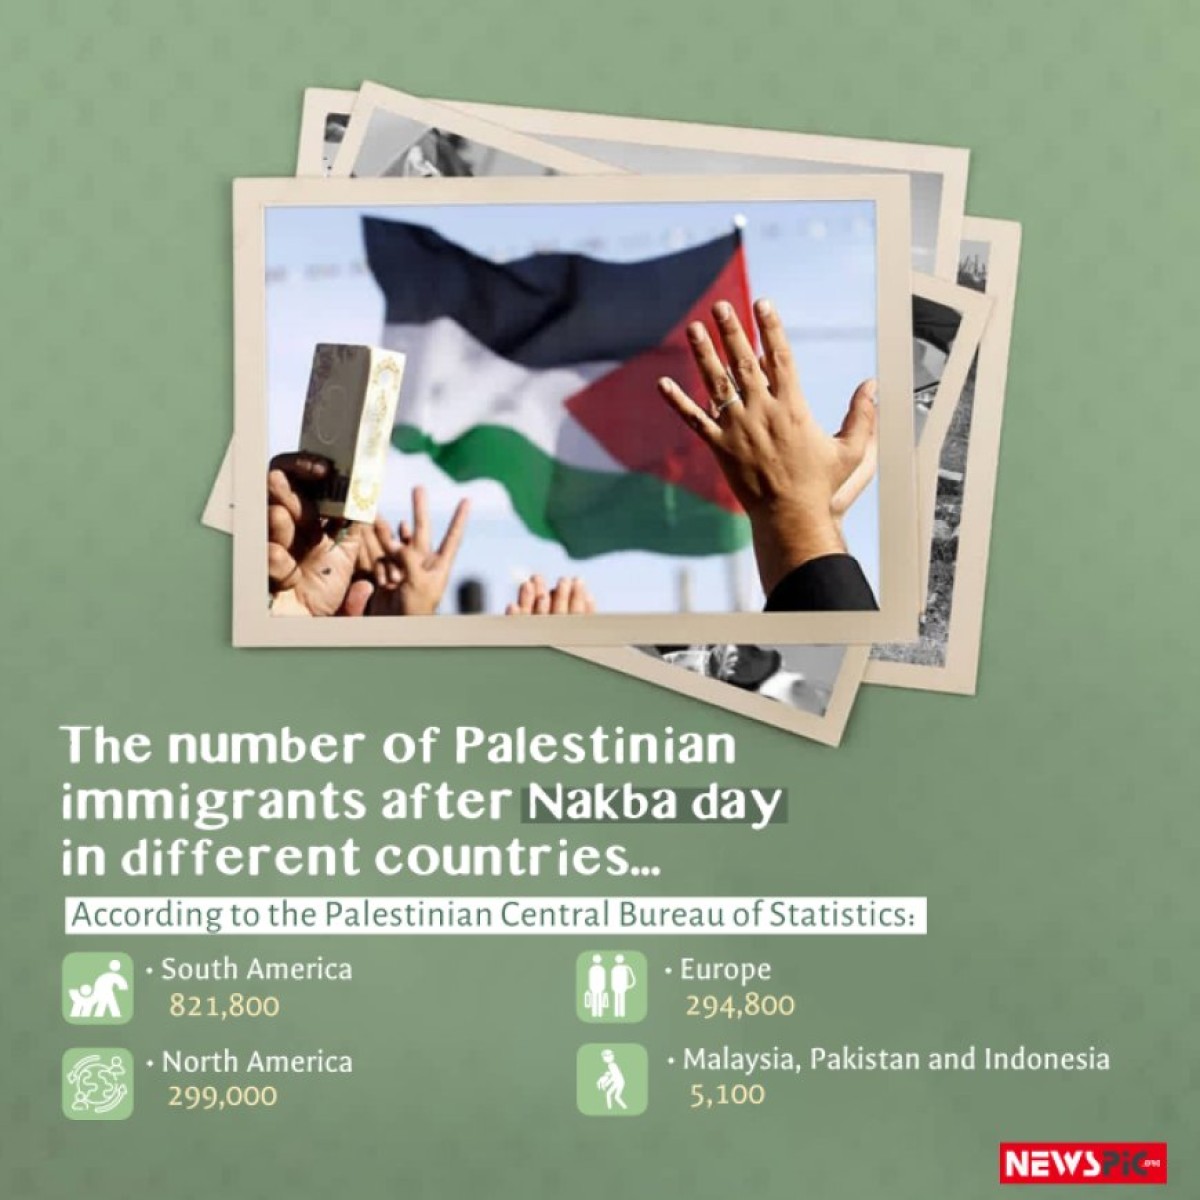 PALESTINIANS IN DIFFERENT COUNTRIES AFfTER NAKBA